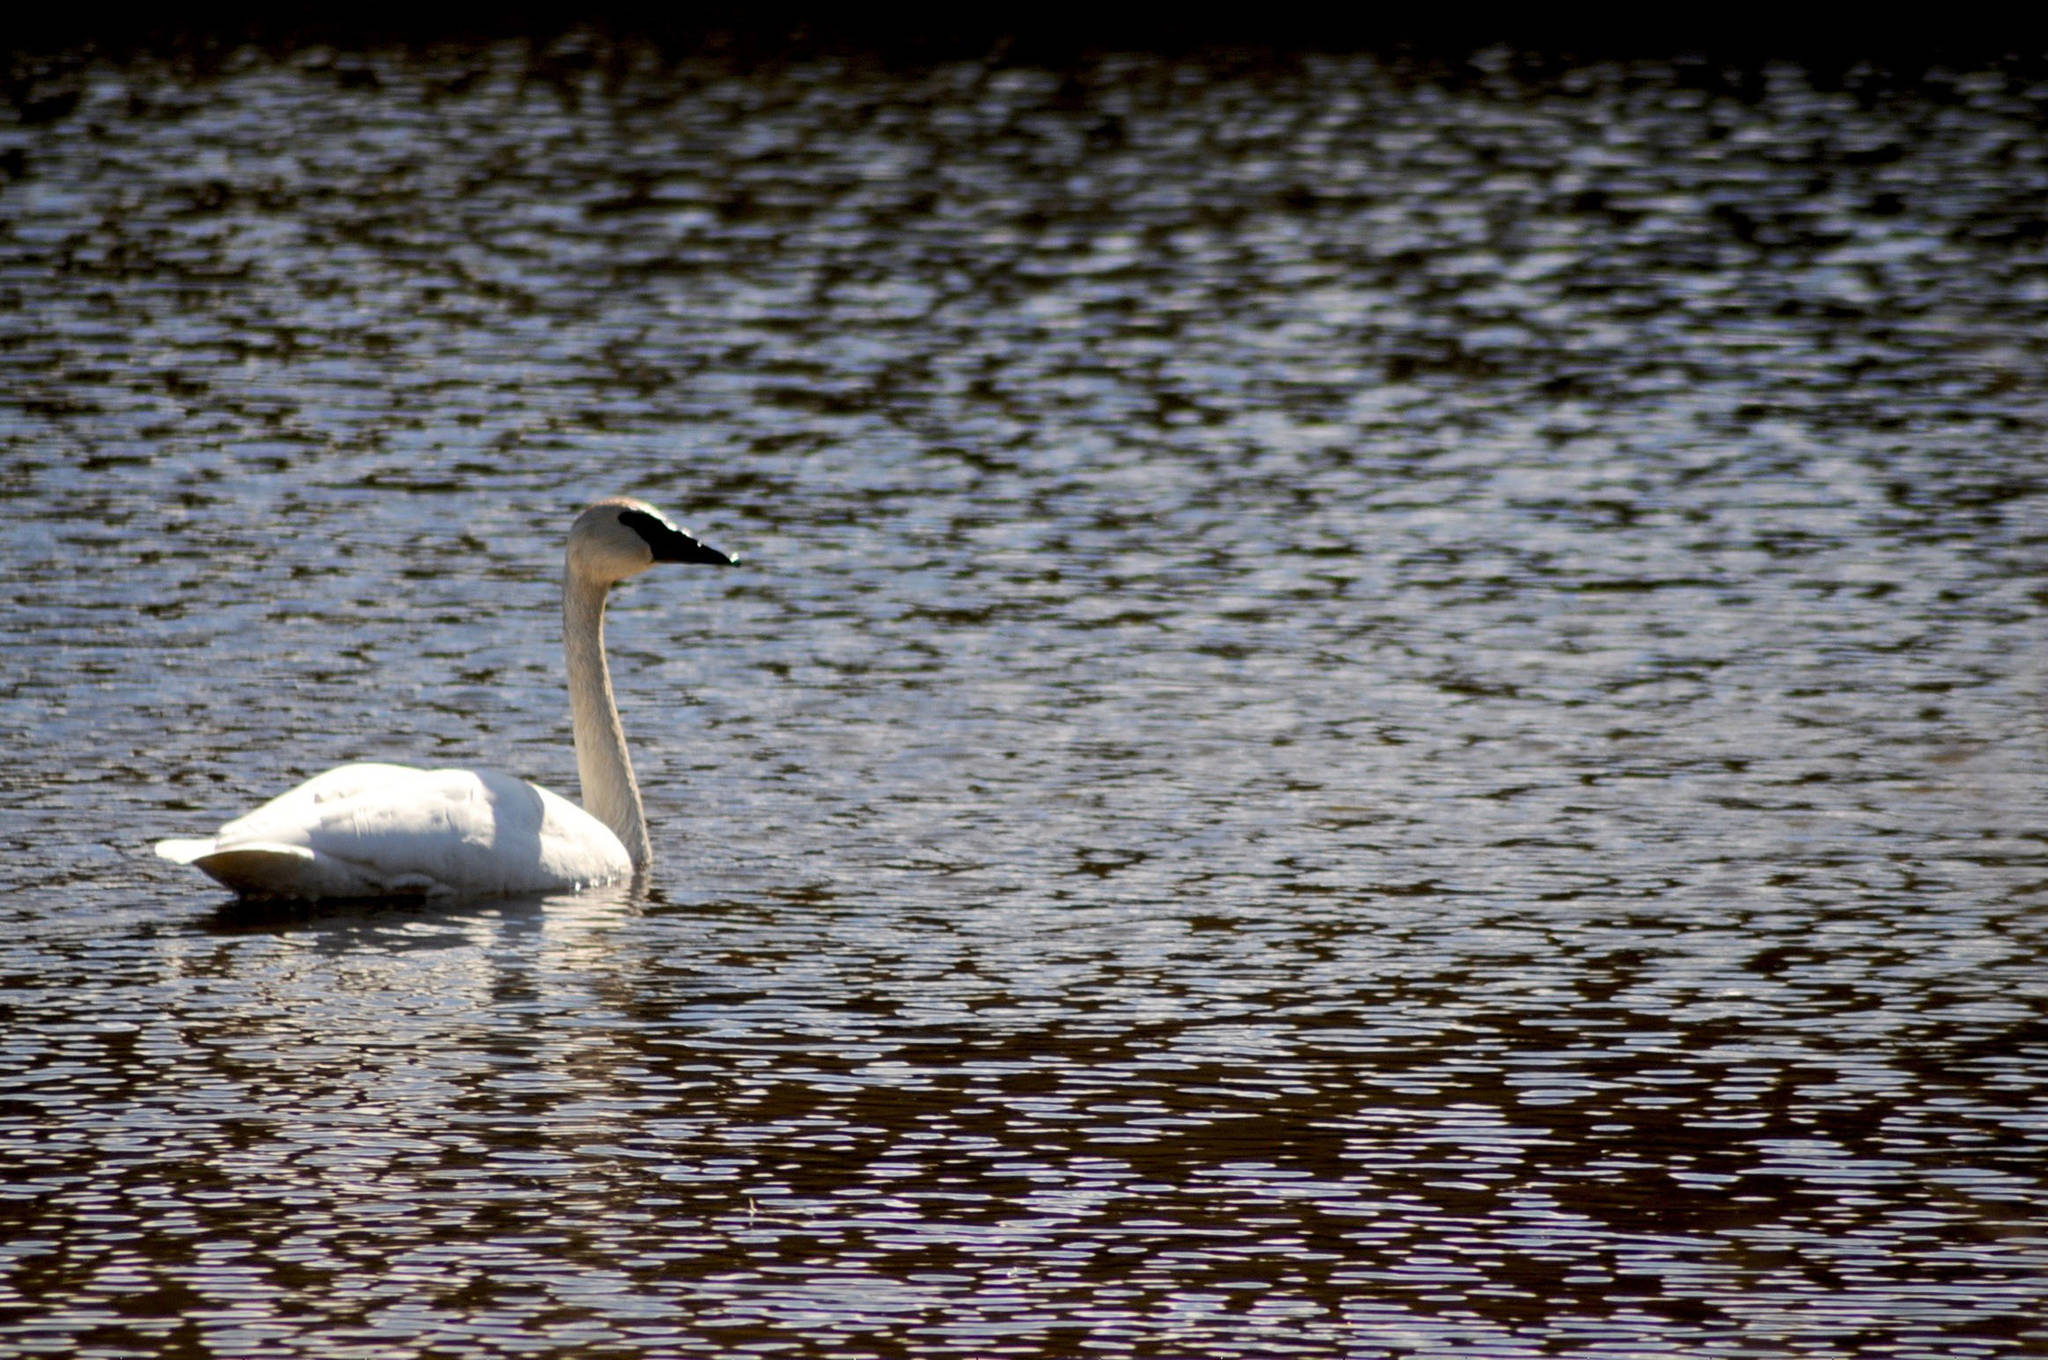 Nesting season on the Kenai  A trumpeter swan sunbathes on an unnamed lake near Skilak Lake on Thursday on the Kenai National Wildlife Refuge. Trumpeter swans, which mate for life, typically nest in marshes next to small lakes as early in the spring as thaw allows, according to the Alaska Department of Fish and Game. They need between 140 and 54 ice-free days to complete a breeding cycle. The Kenai National Wildlife Refuge has a growing population of swans, with about 50 nesting pairs. (Elizabeth Earl/Peninsula Clarion)